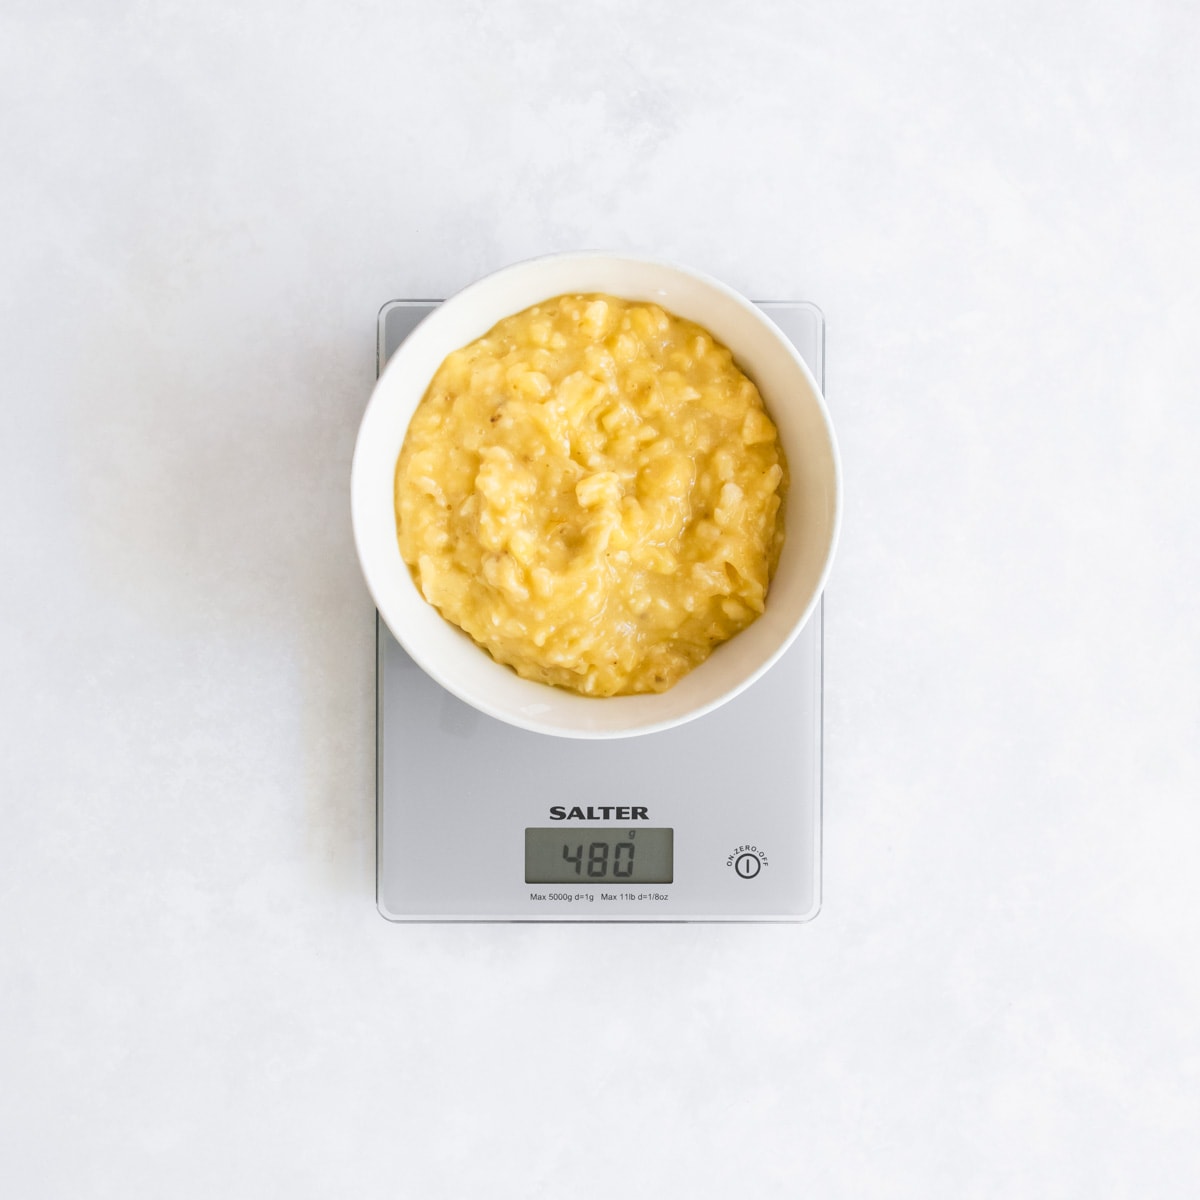 A bowl of mashed banana sitting on a set of digital scales.